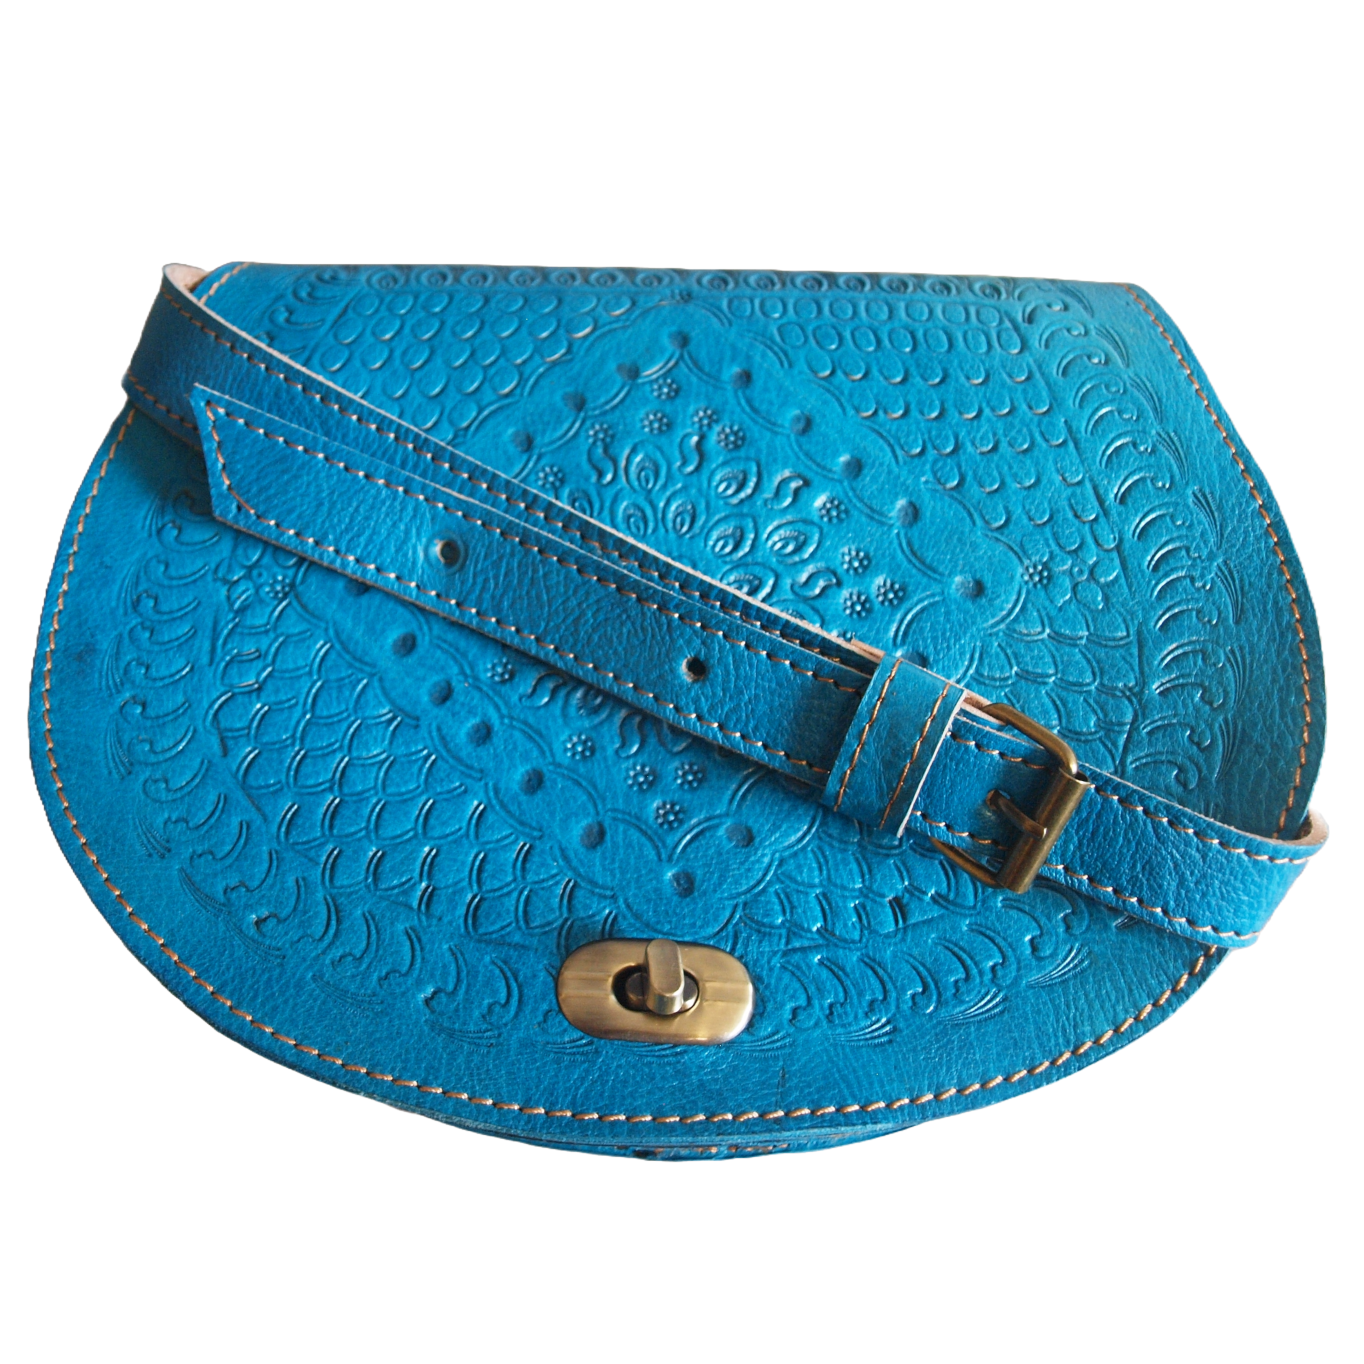 The Temara Embossed Saddle Bag in Blue on White Background